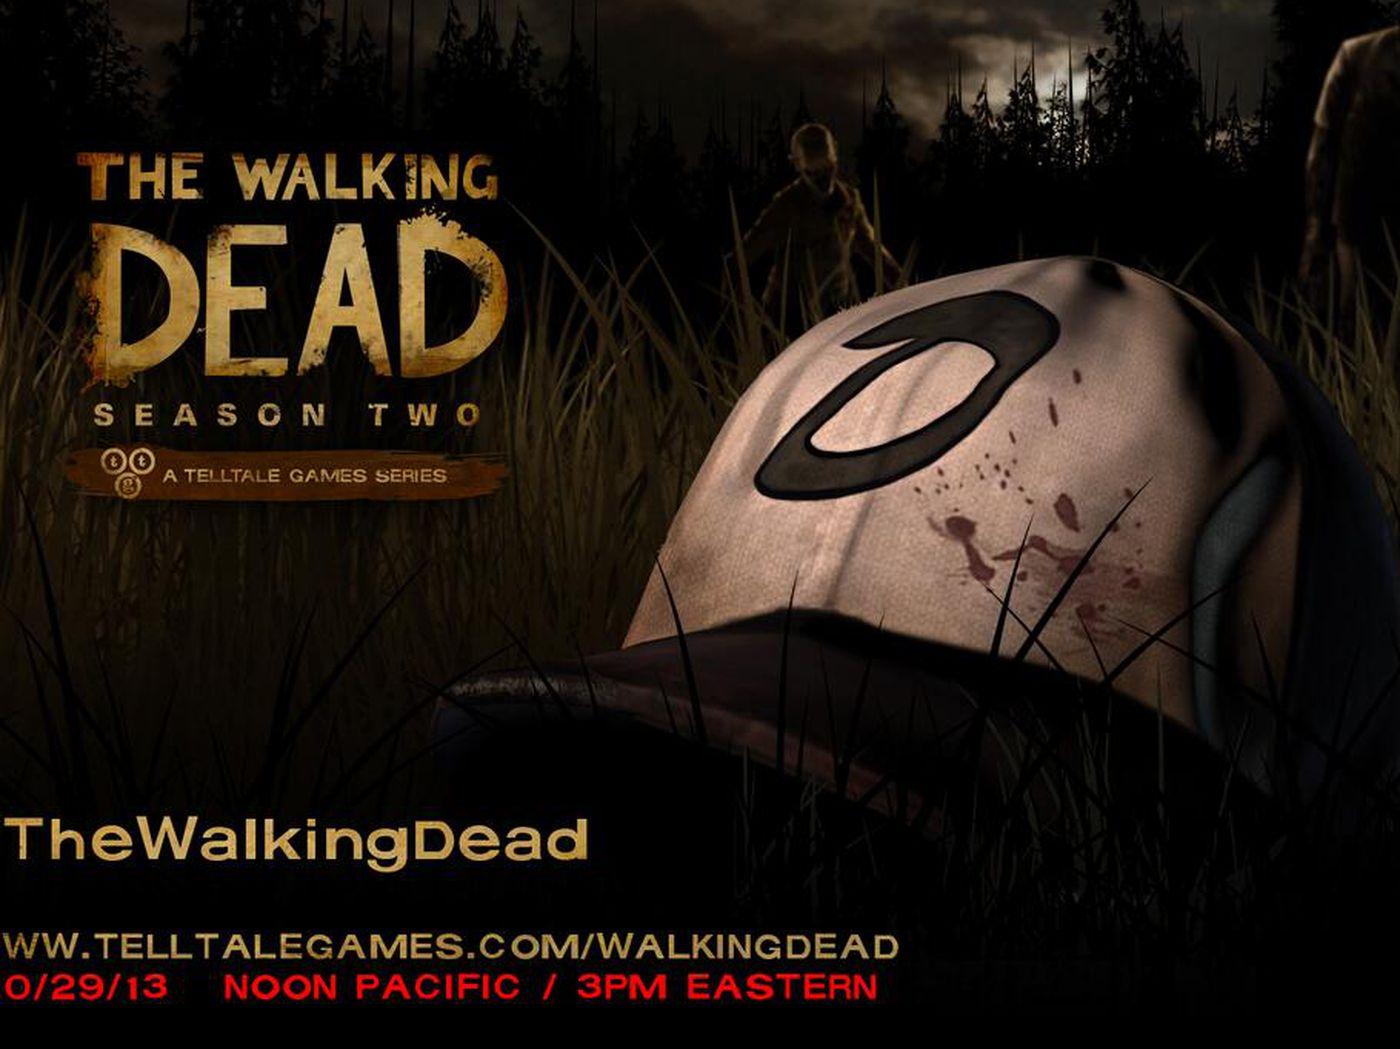 The Walking Dead Season Two details coming this week   Polygon